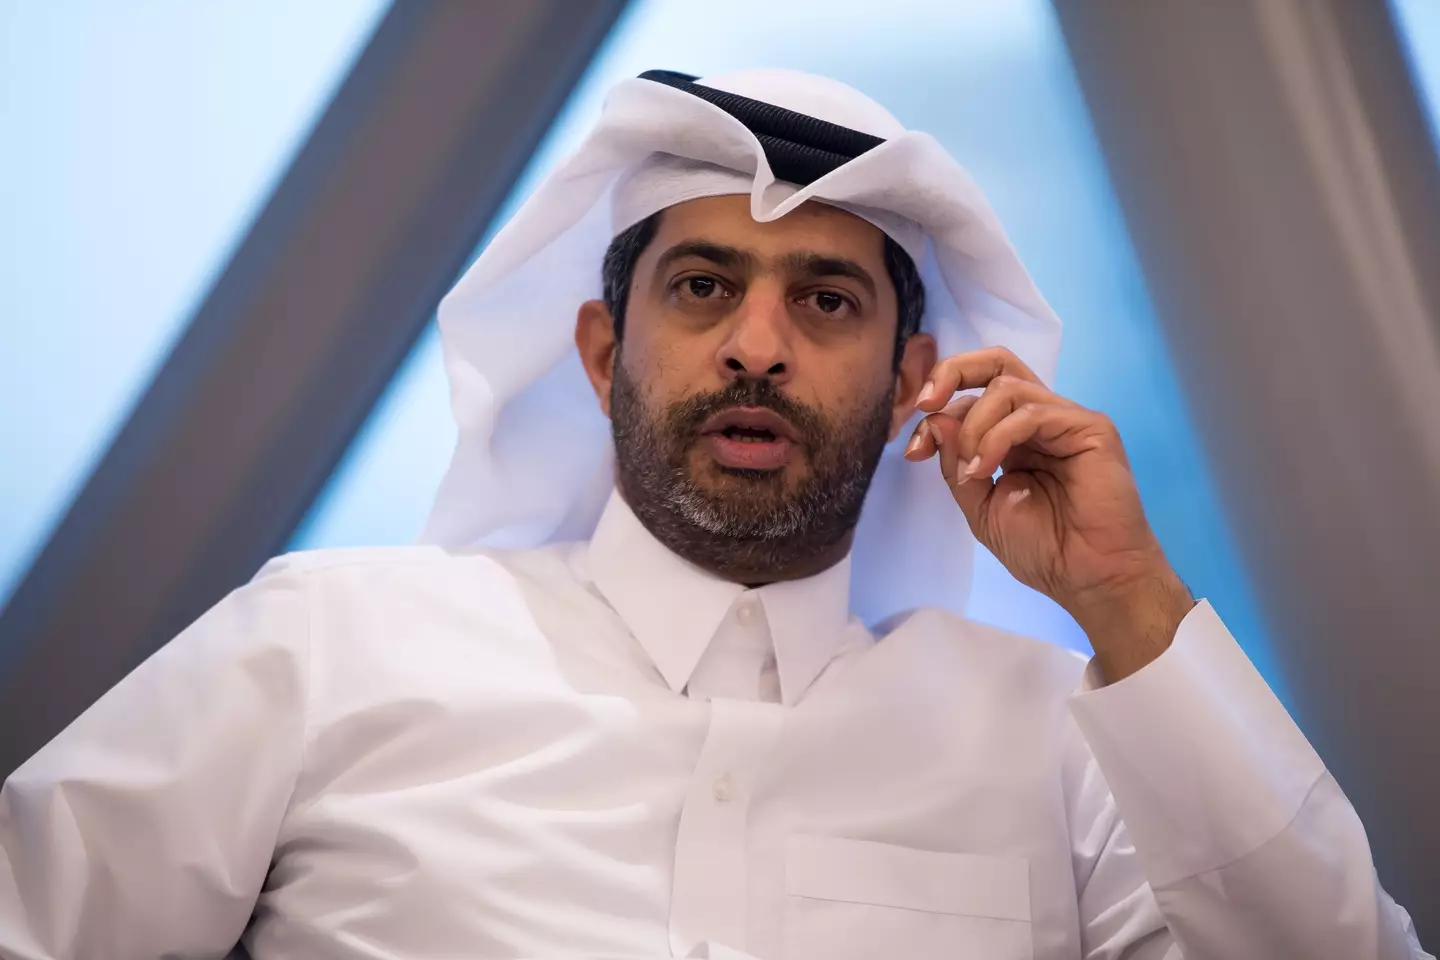 World Cup CEO Nasser Al Khater insisted 'everybody is welcome here' and that 'everyone will feel safe'.